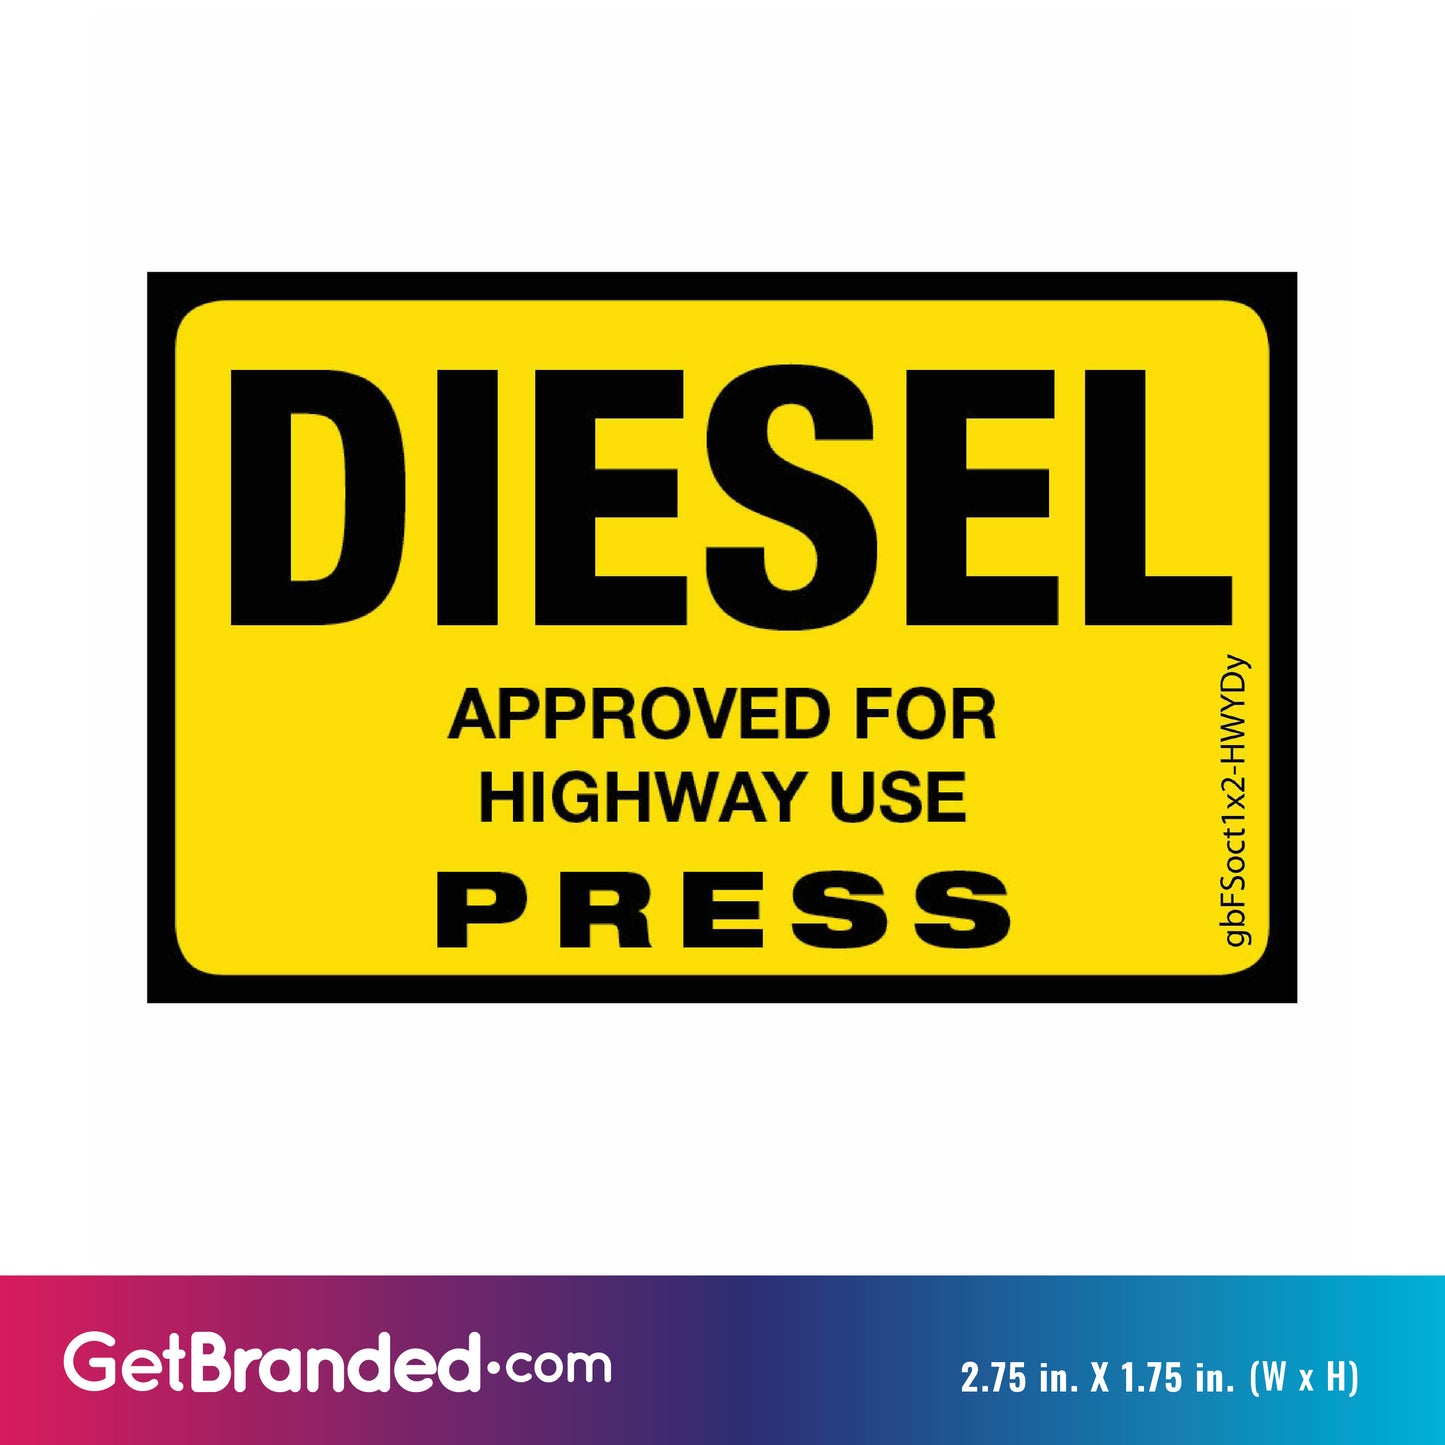 Diesel (On Road) Press Octane Rating Decal, Yellow size guide.